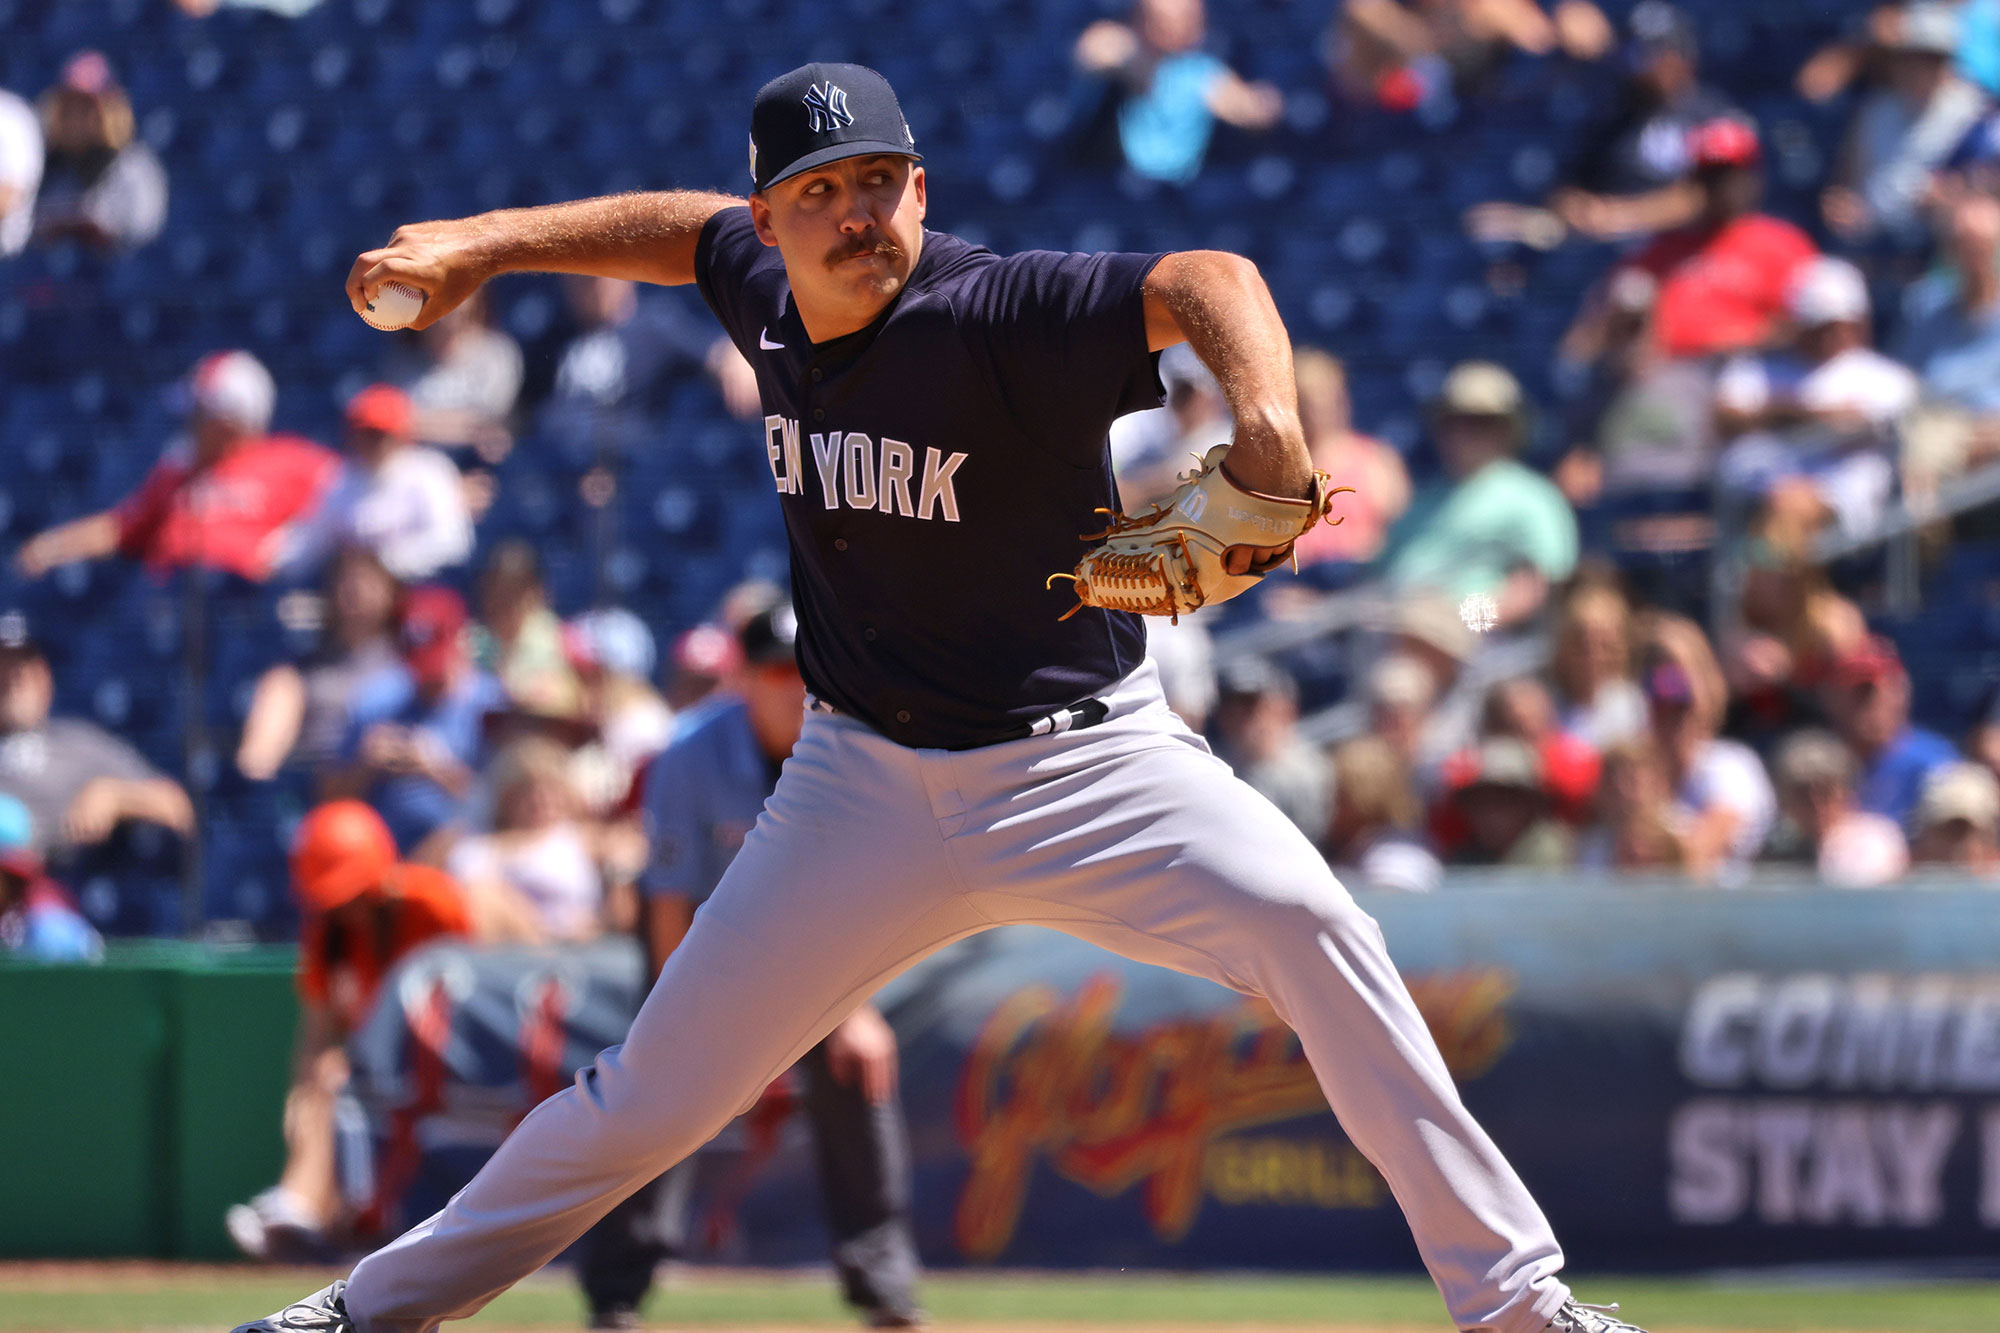 New York Yankees pitcher Greg Weissert, pitching in the 3rd inning. Photo by